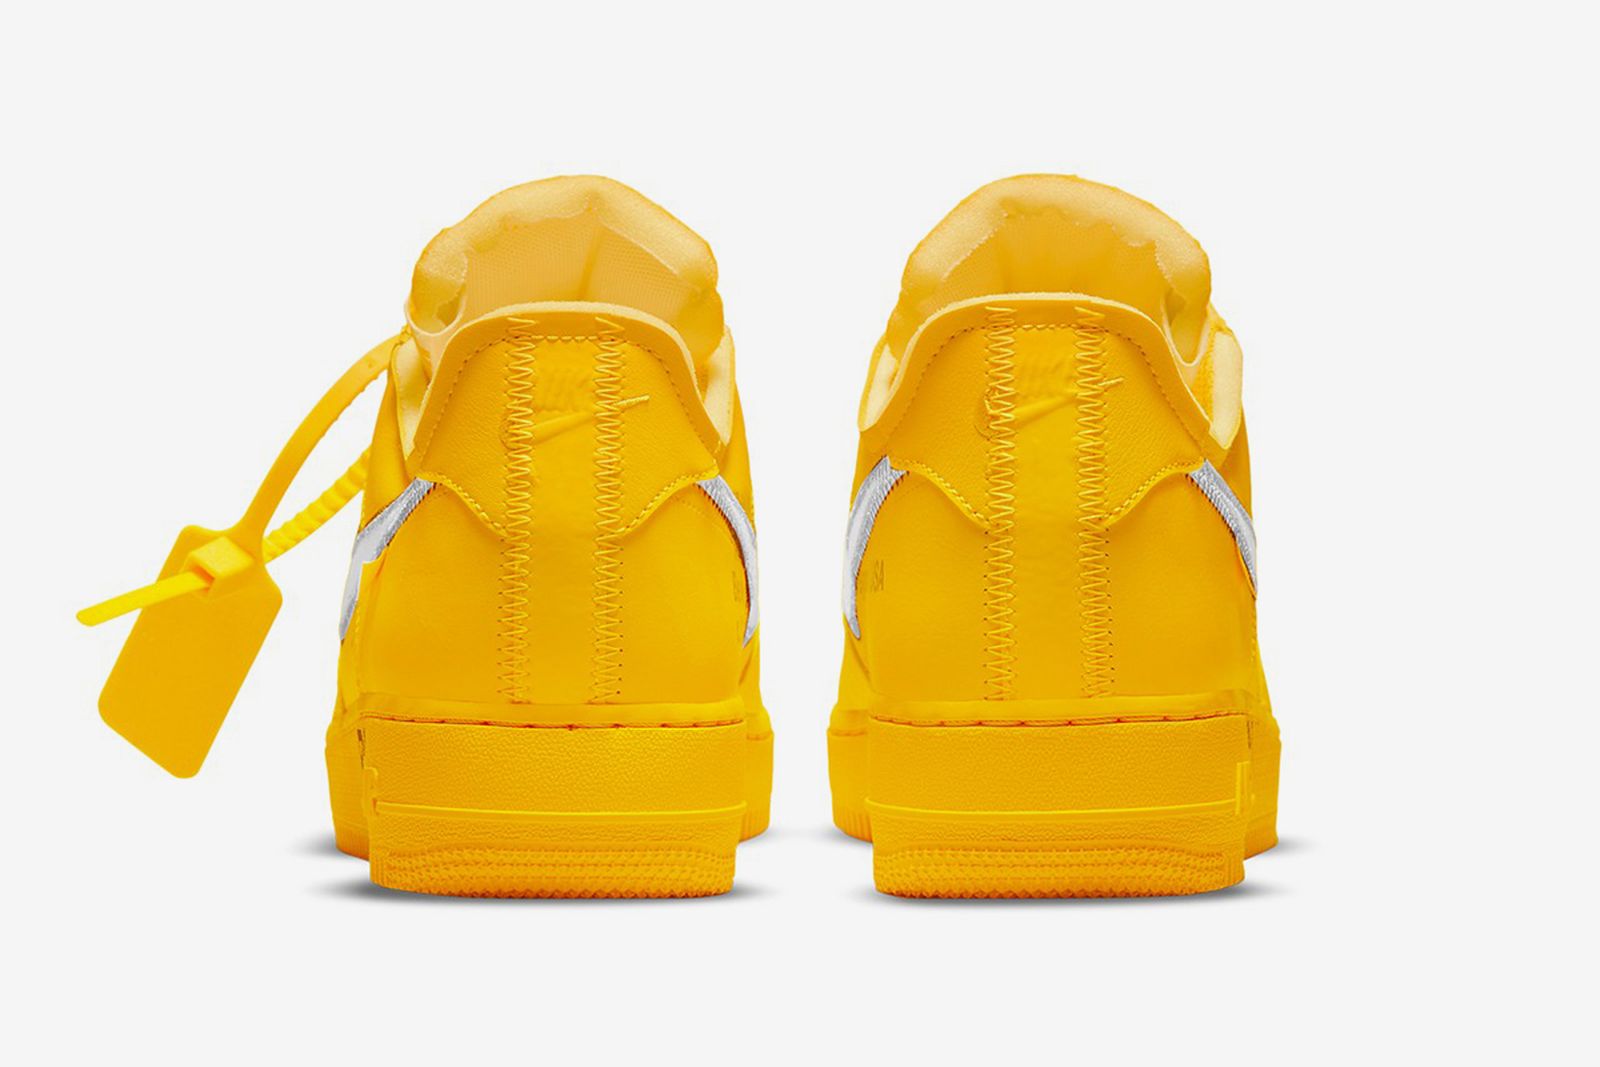 Off-White™ off white jordan 1 canary yellow x Nike Air Force 1 "Lemonade": Images & Release Info